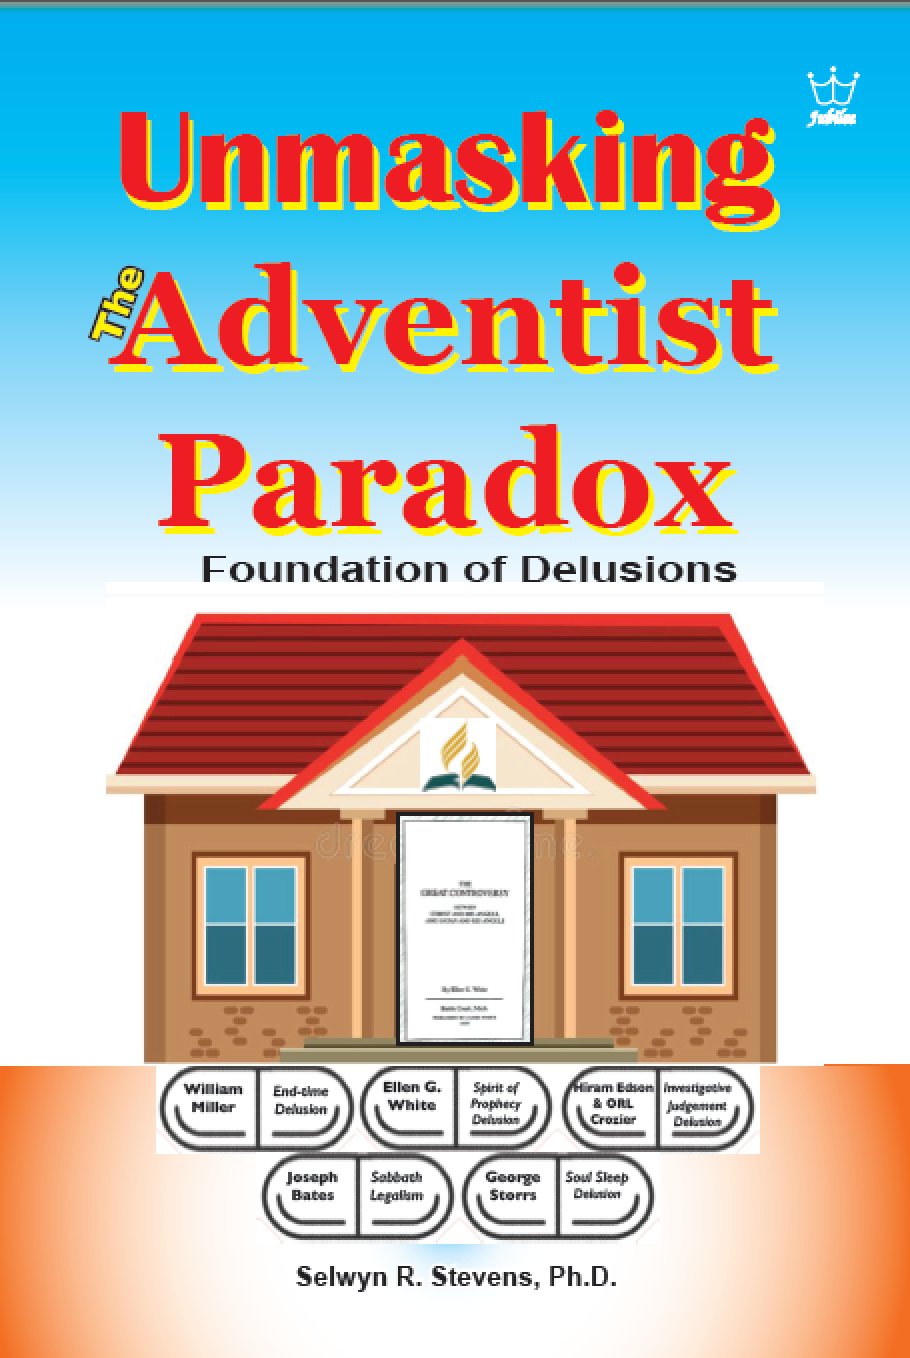 Unmasking the Adventist Paradox: Foundation of Delusions Book #BUAS (NEW!)